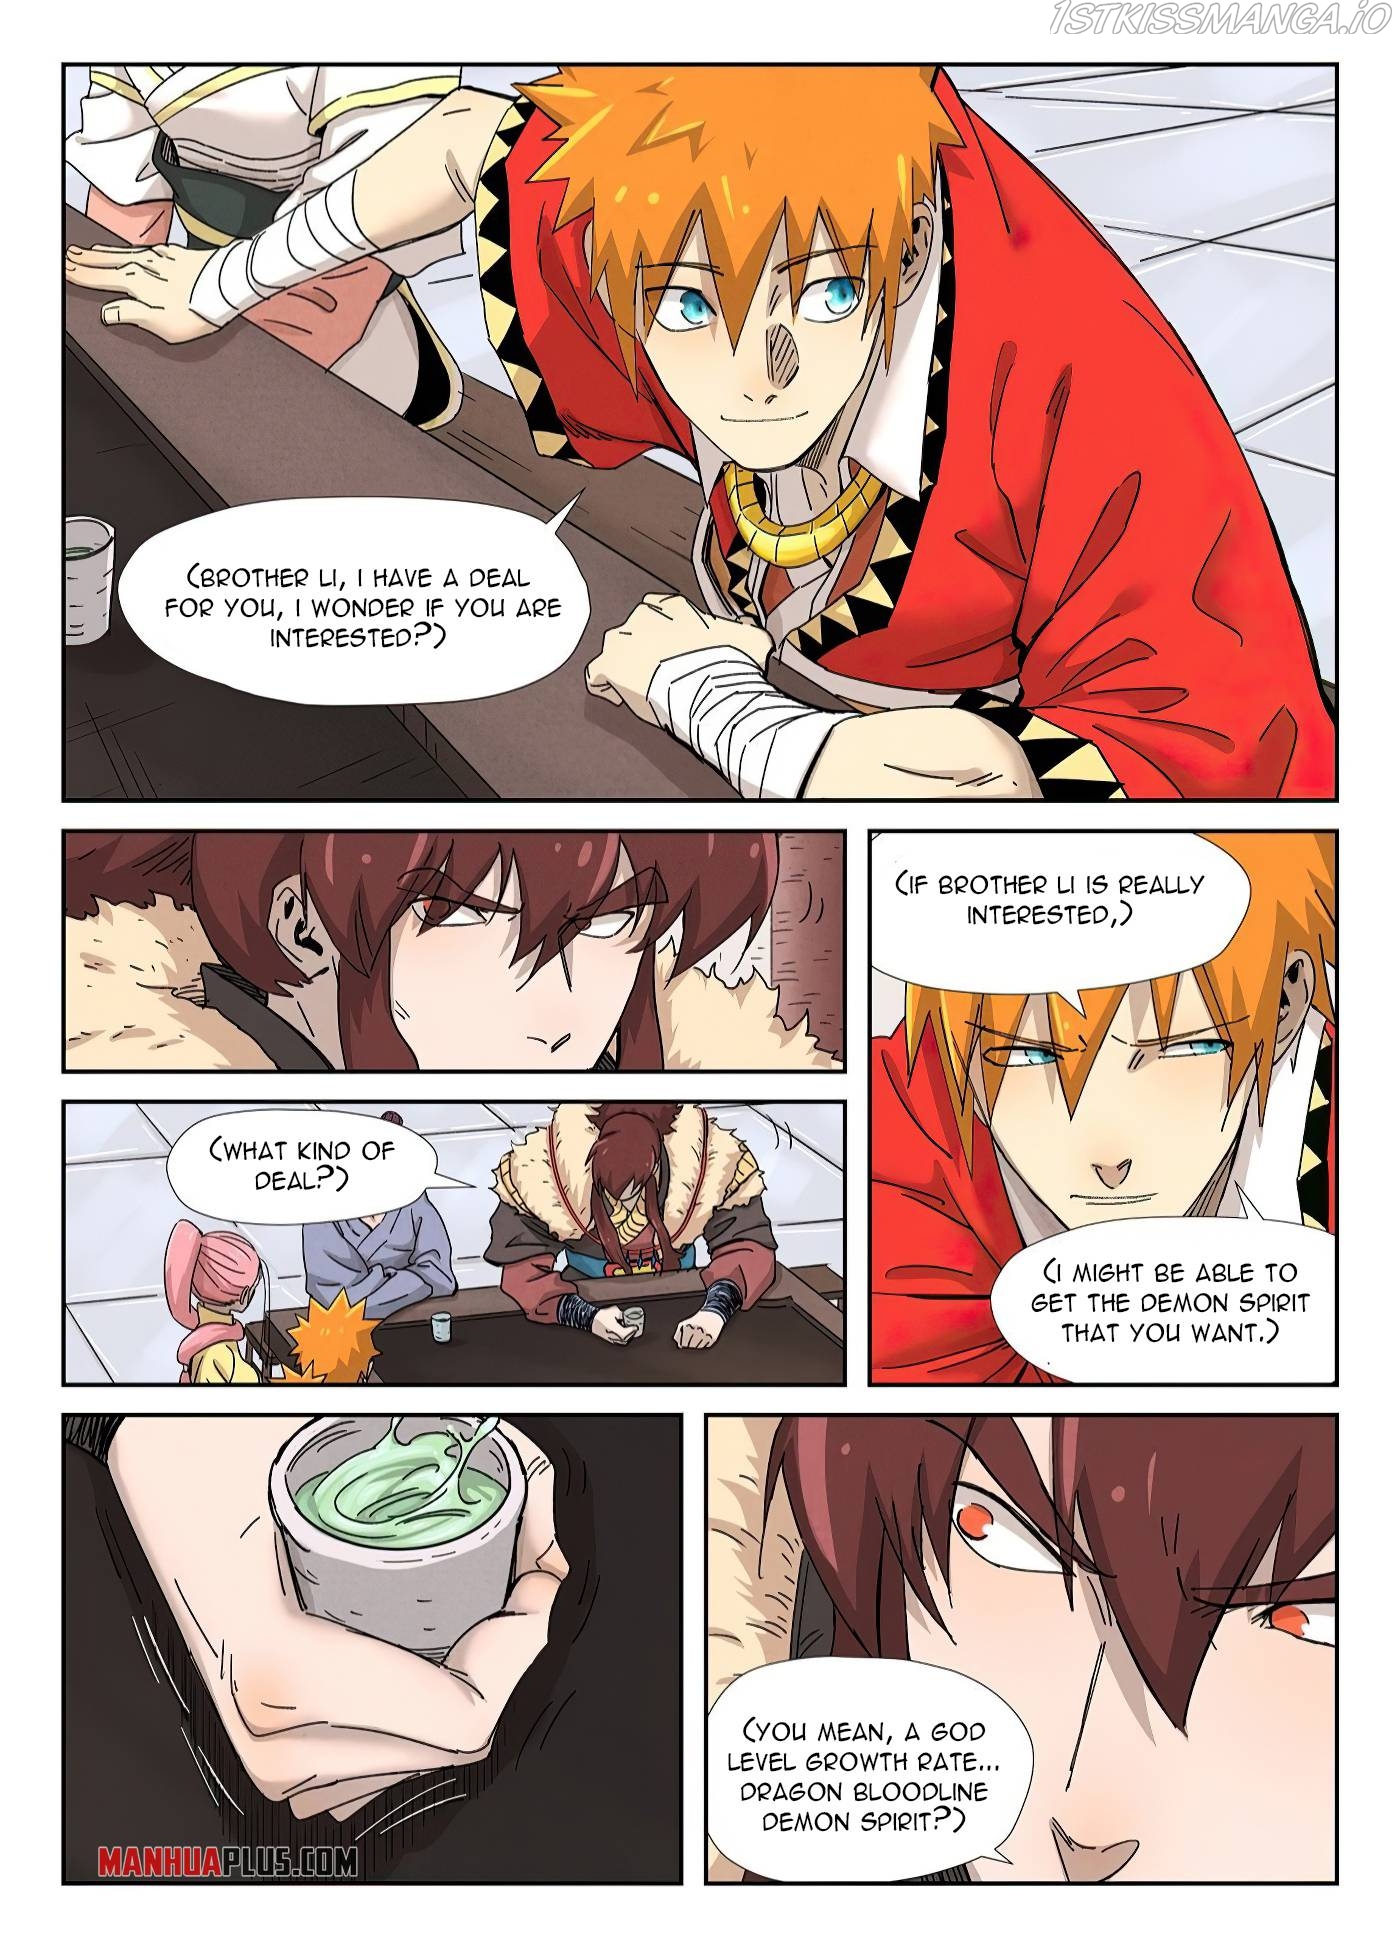 Tales of Demons and Gods Manhua Chapter 337.6 - Page 5